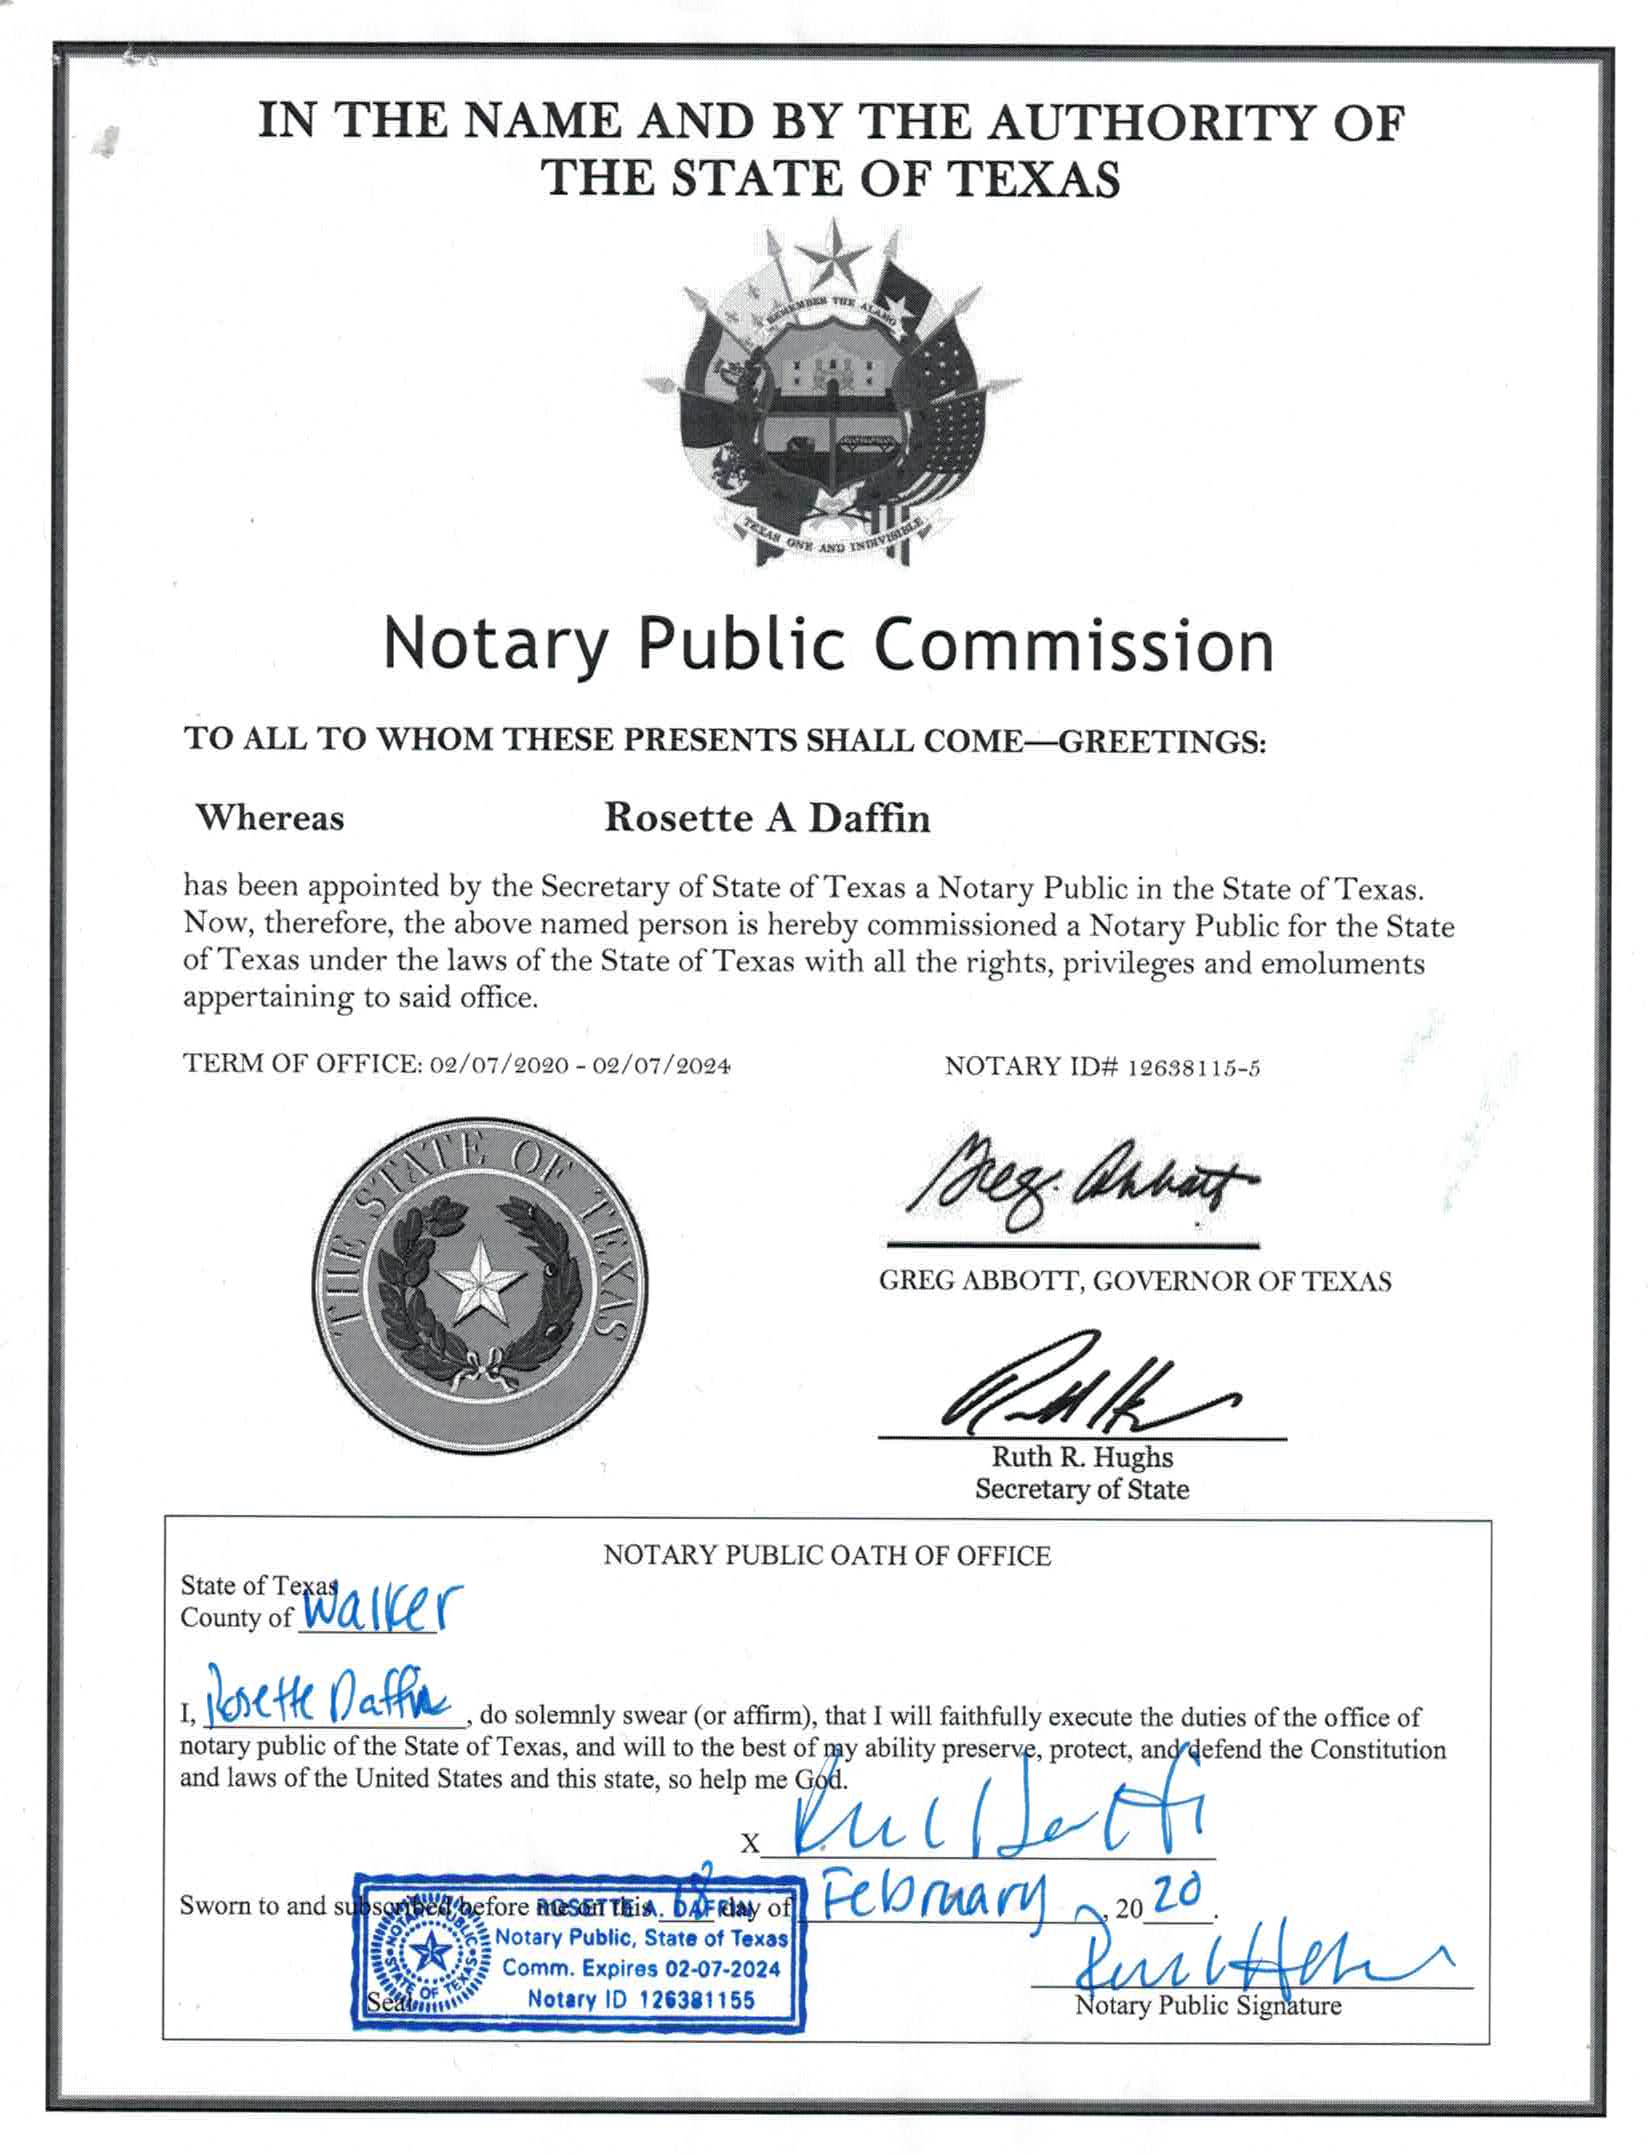 Notary Commission.JPG